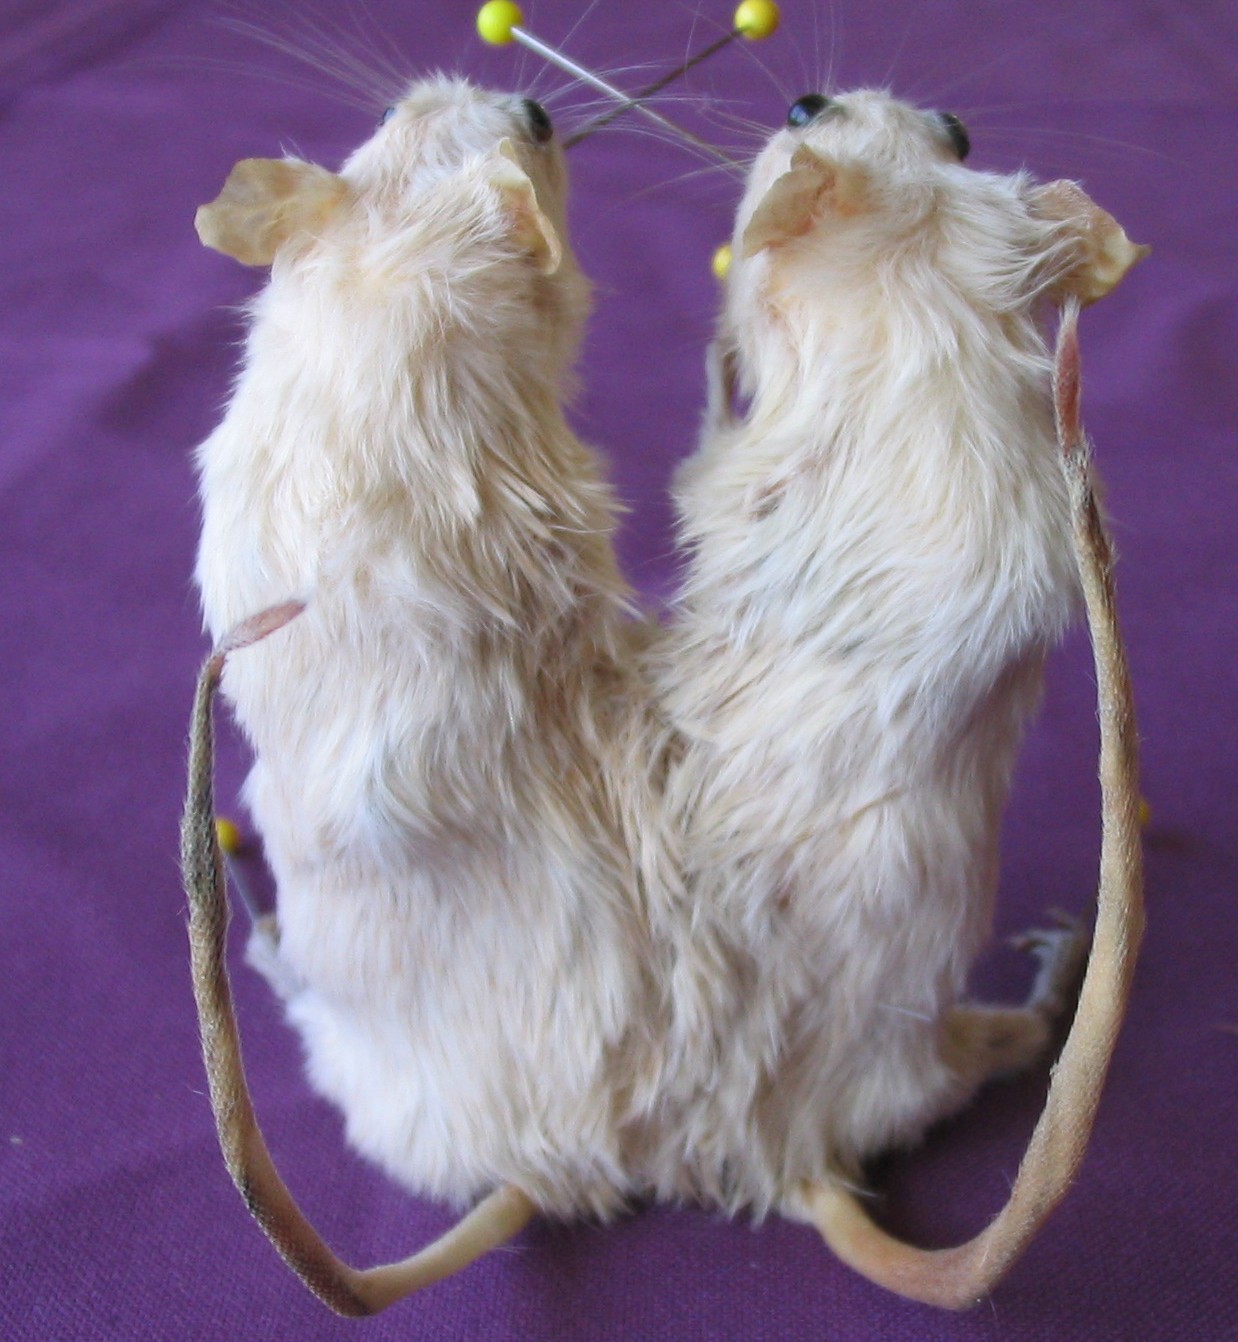 Conjoined Twin Mice